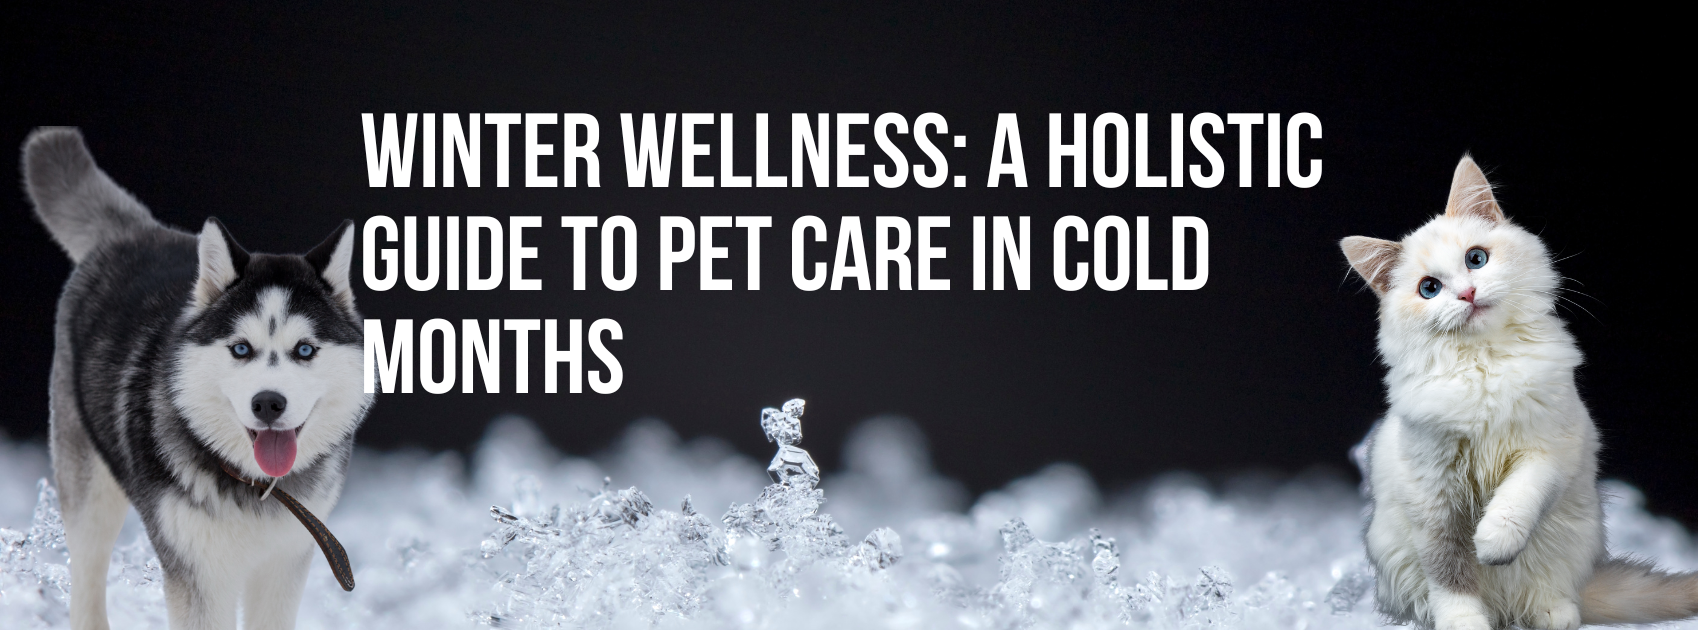 Winter Wellness: A Holistic Guide to Pet Care in Cold Months